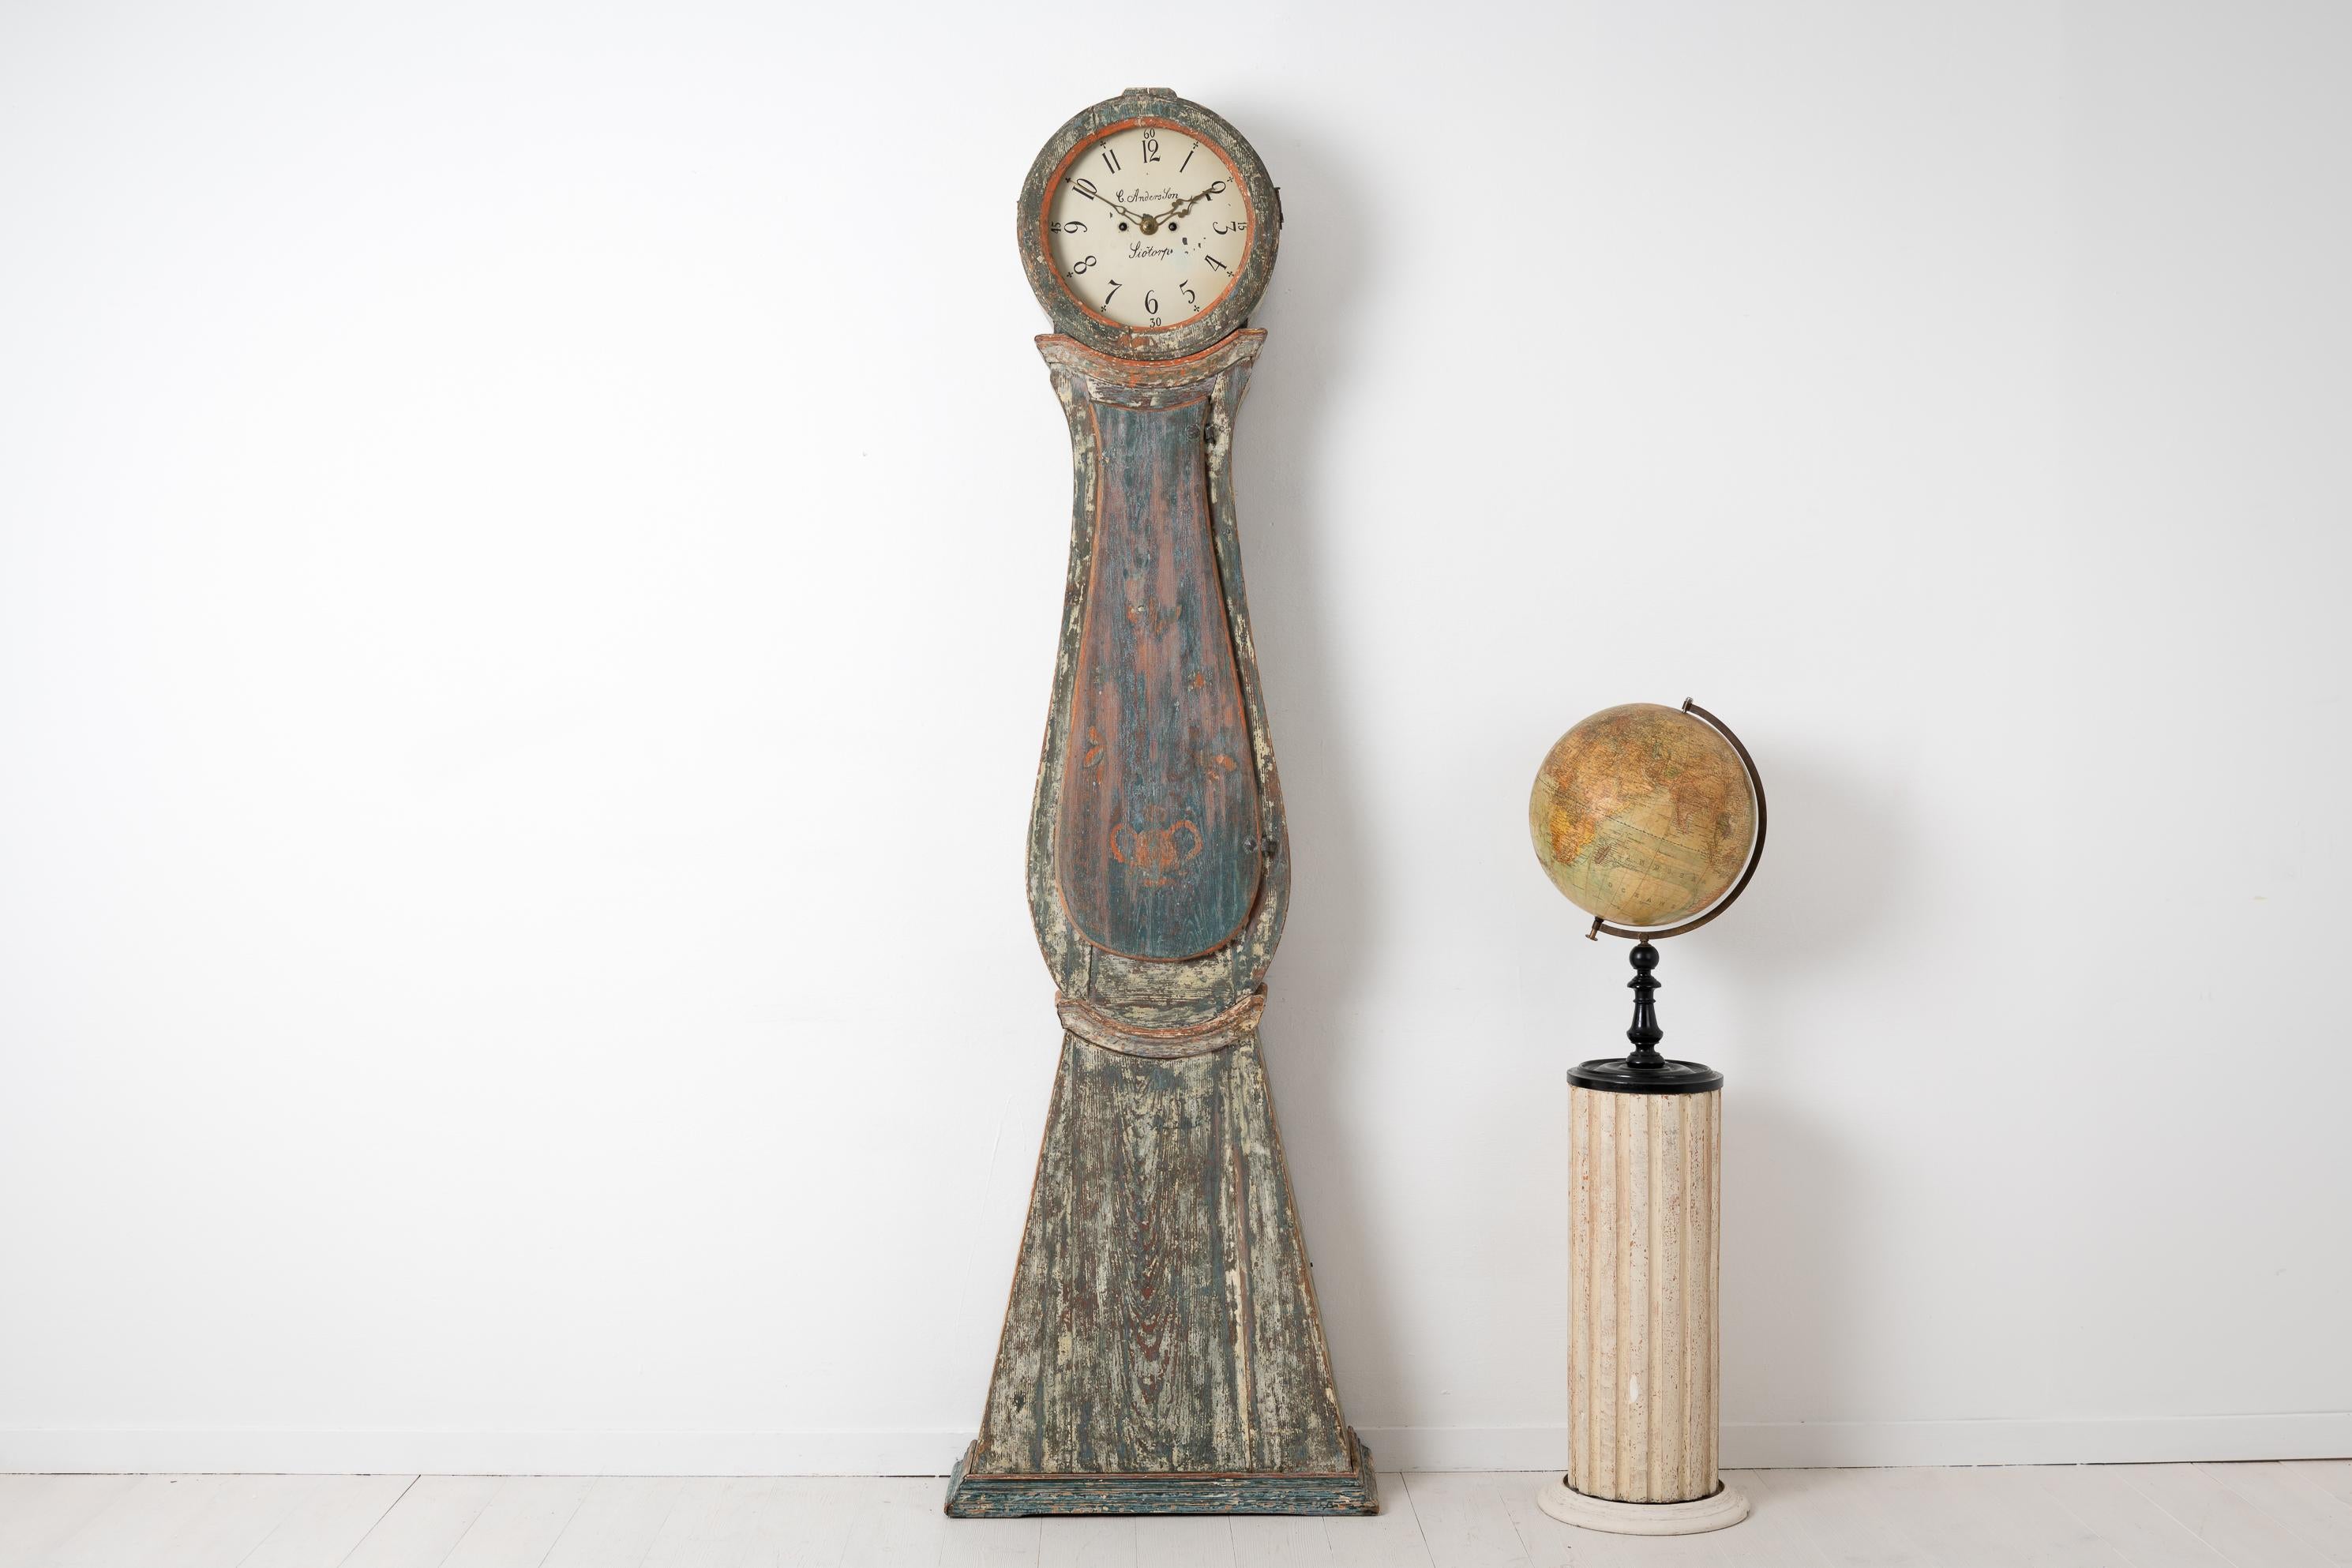 Long case clock from Sweden made during the early 19th century, around 1820 to 1840. The clock has a rococo shape with the original blue green paint where the multiple tones of the paint contributes to the genuine antique character. The case is